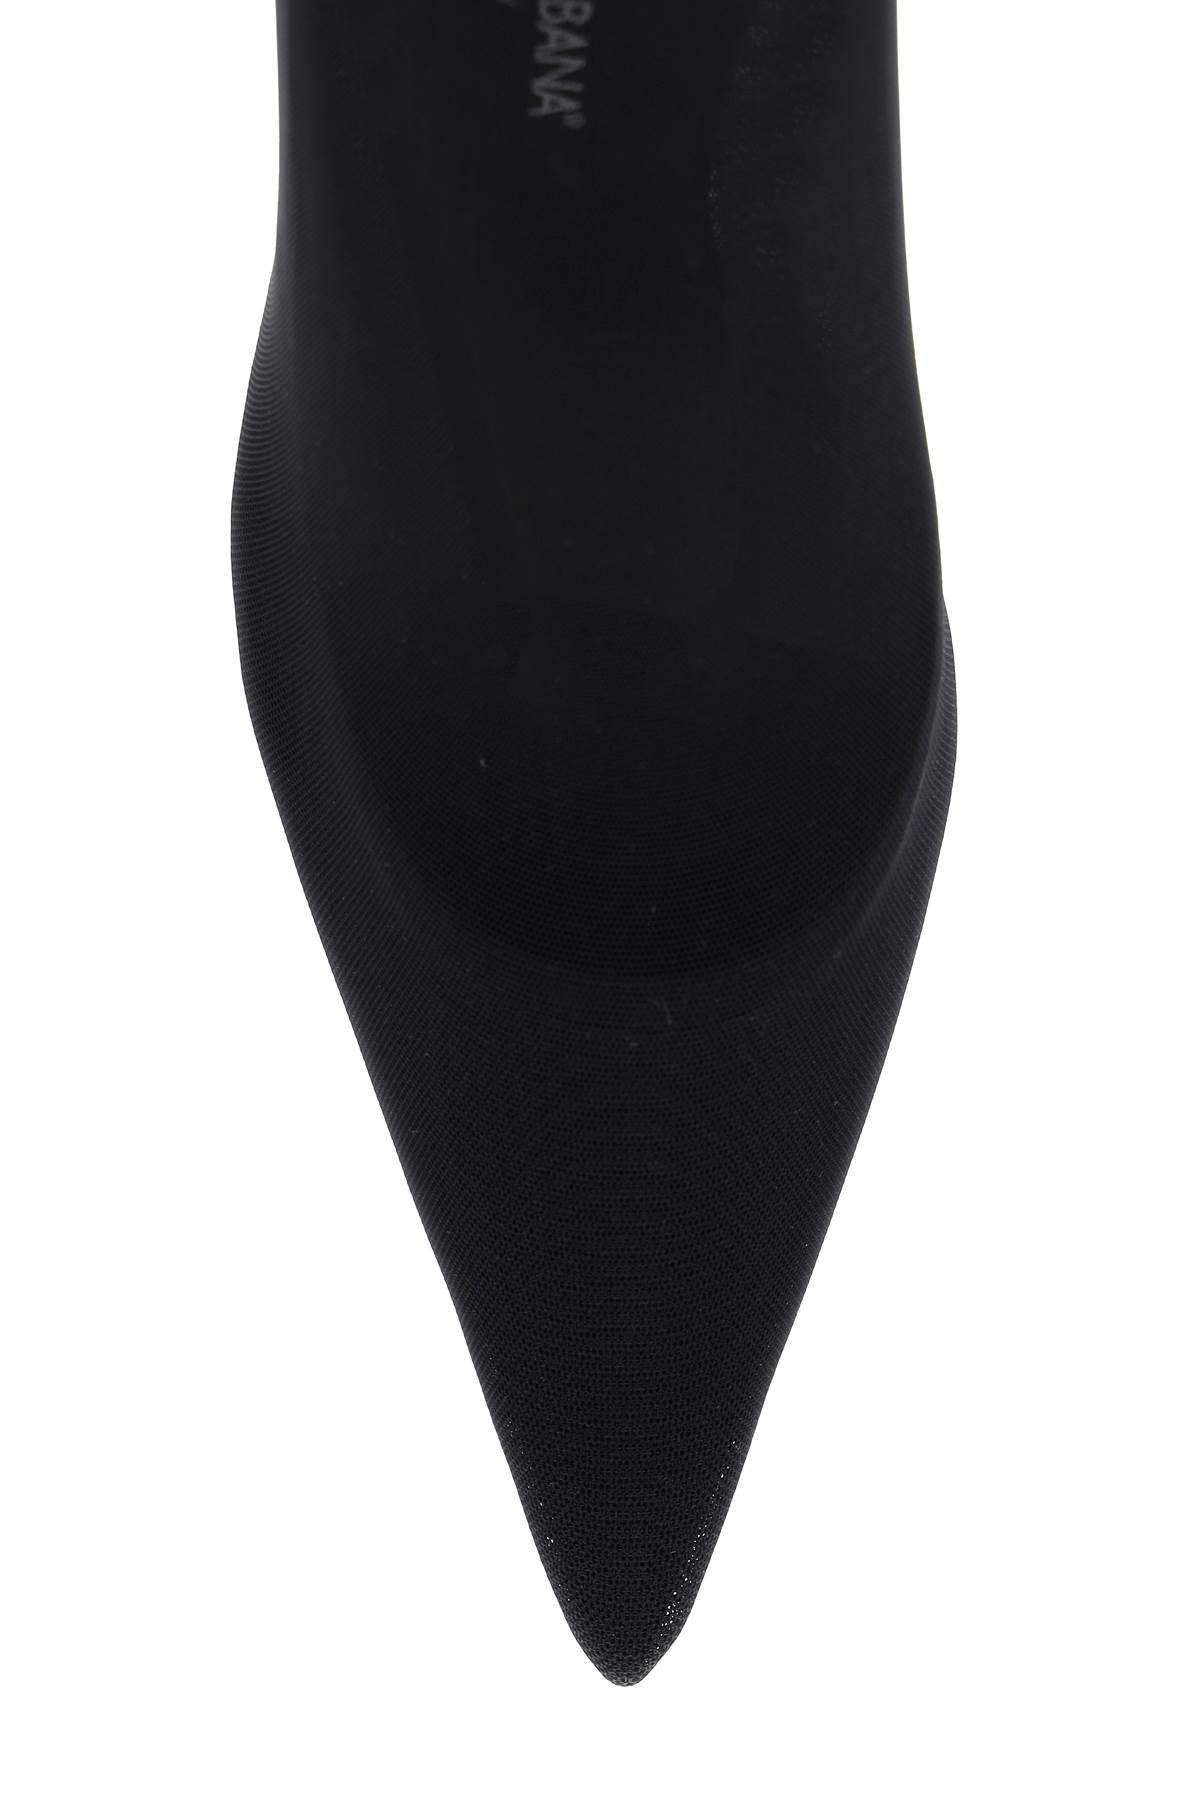 DOLCE & GABBANA Stretch Tulle Thigh-High Boots for Women - Black